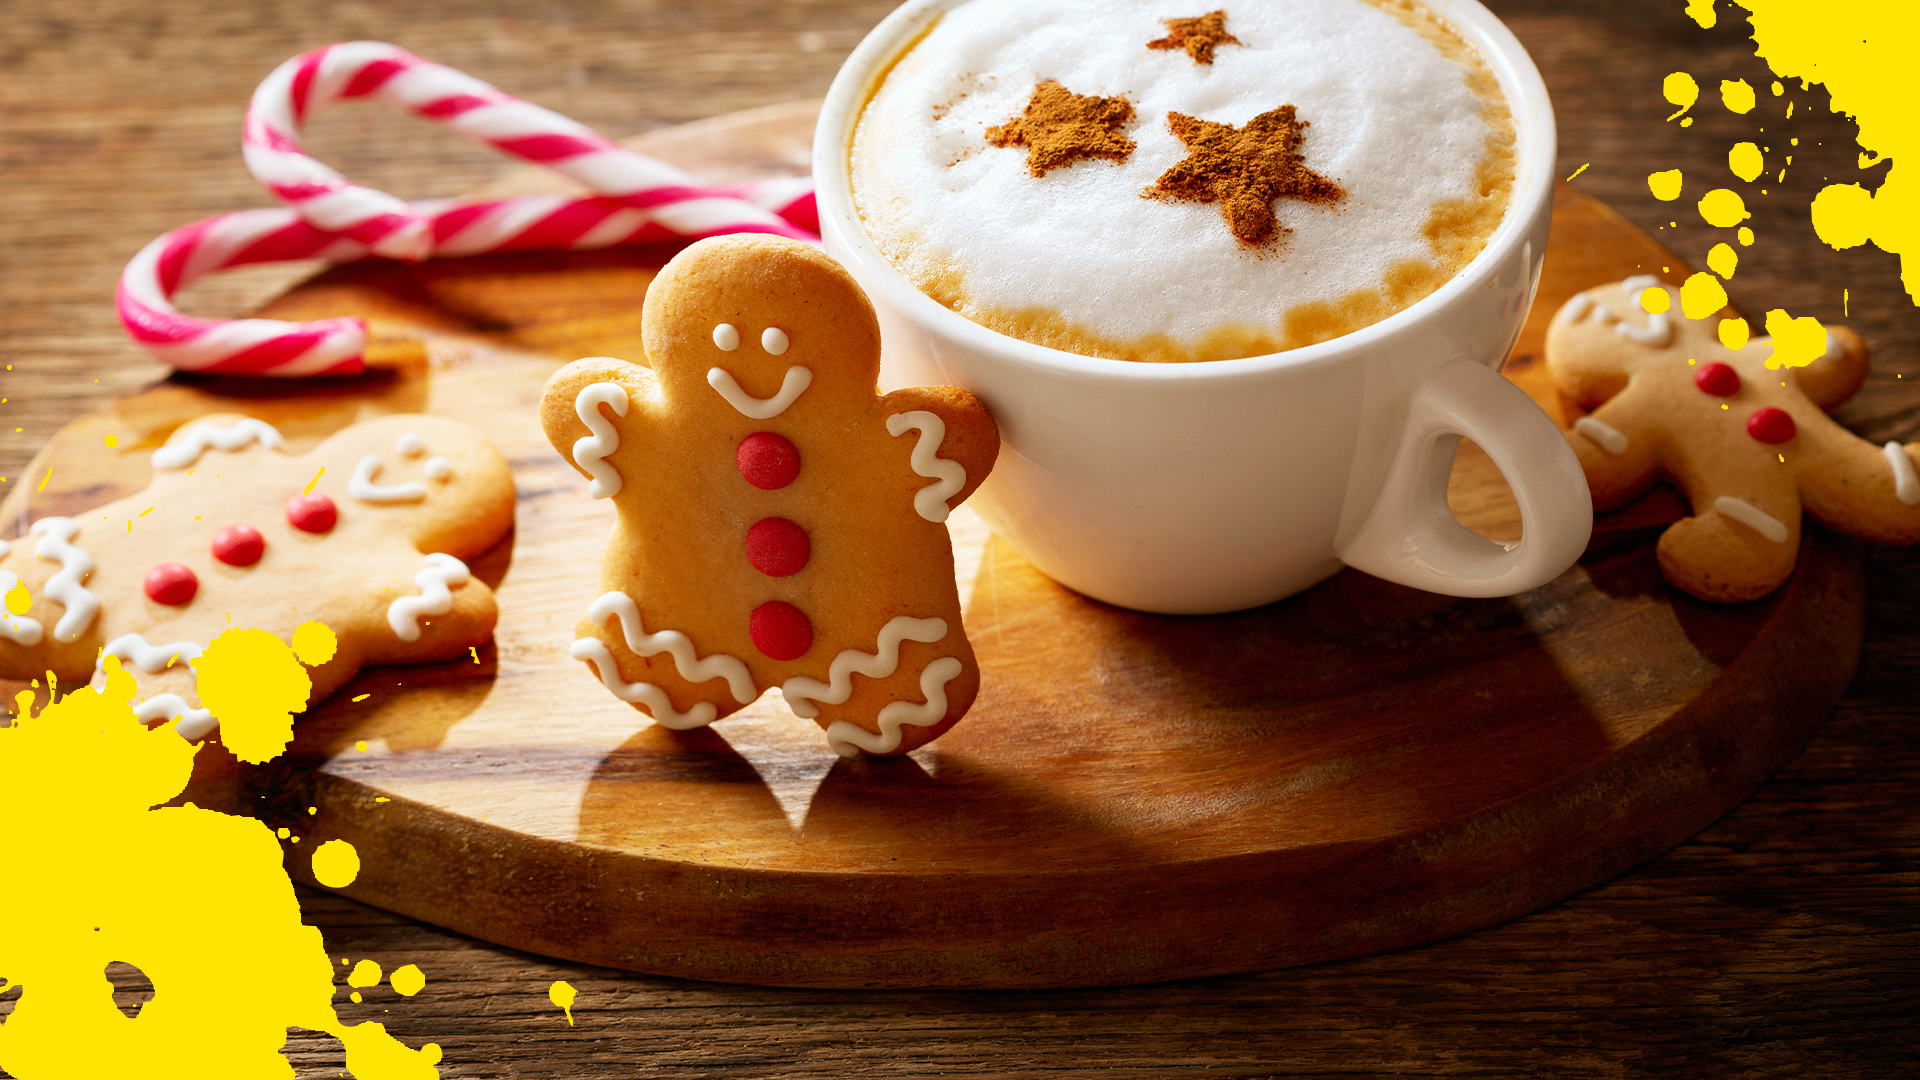 Gingerbread latte and yellow splats